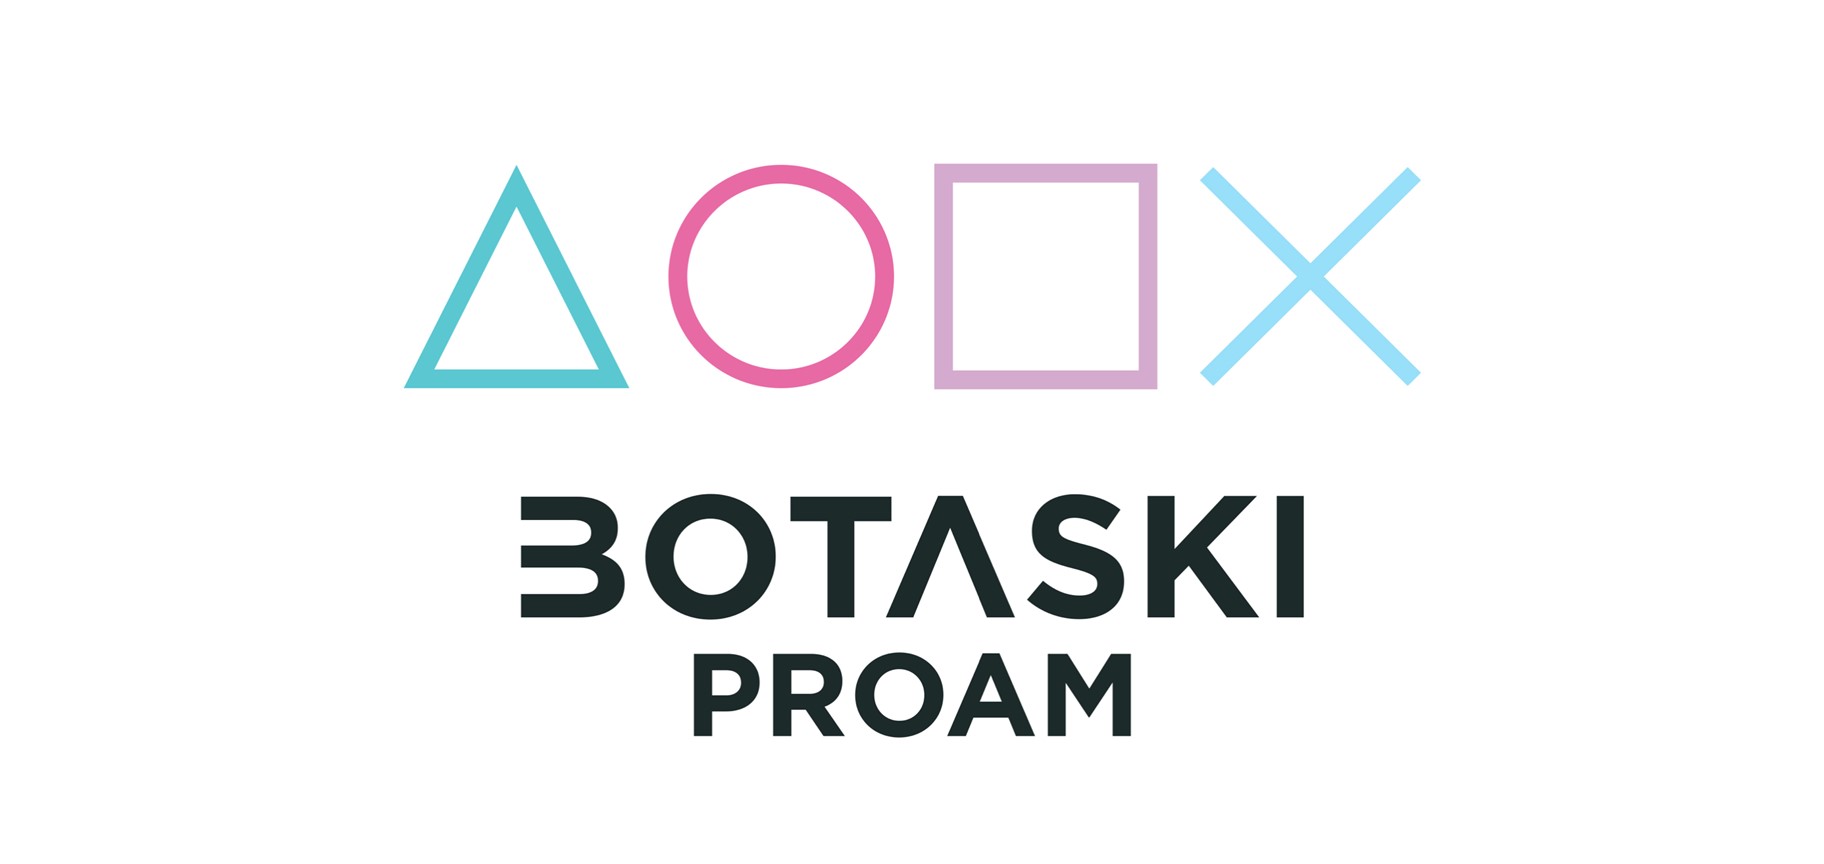 The Botaski ProAm is a qualifier for the U.S. Masters